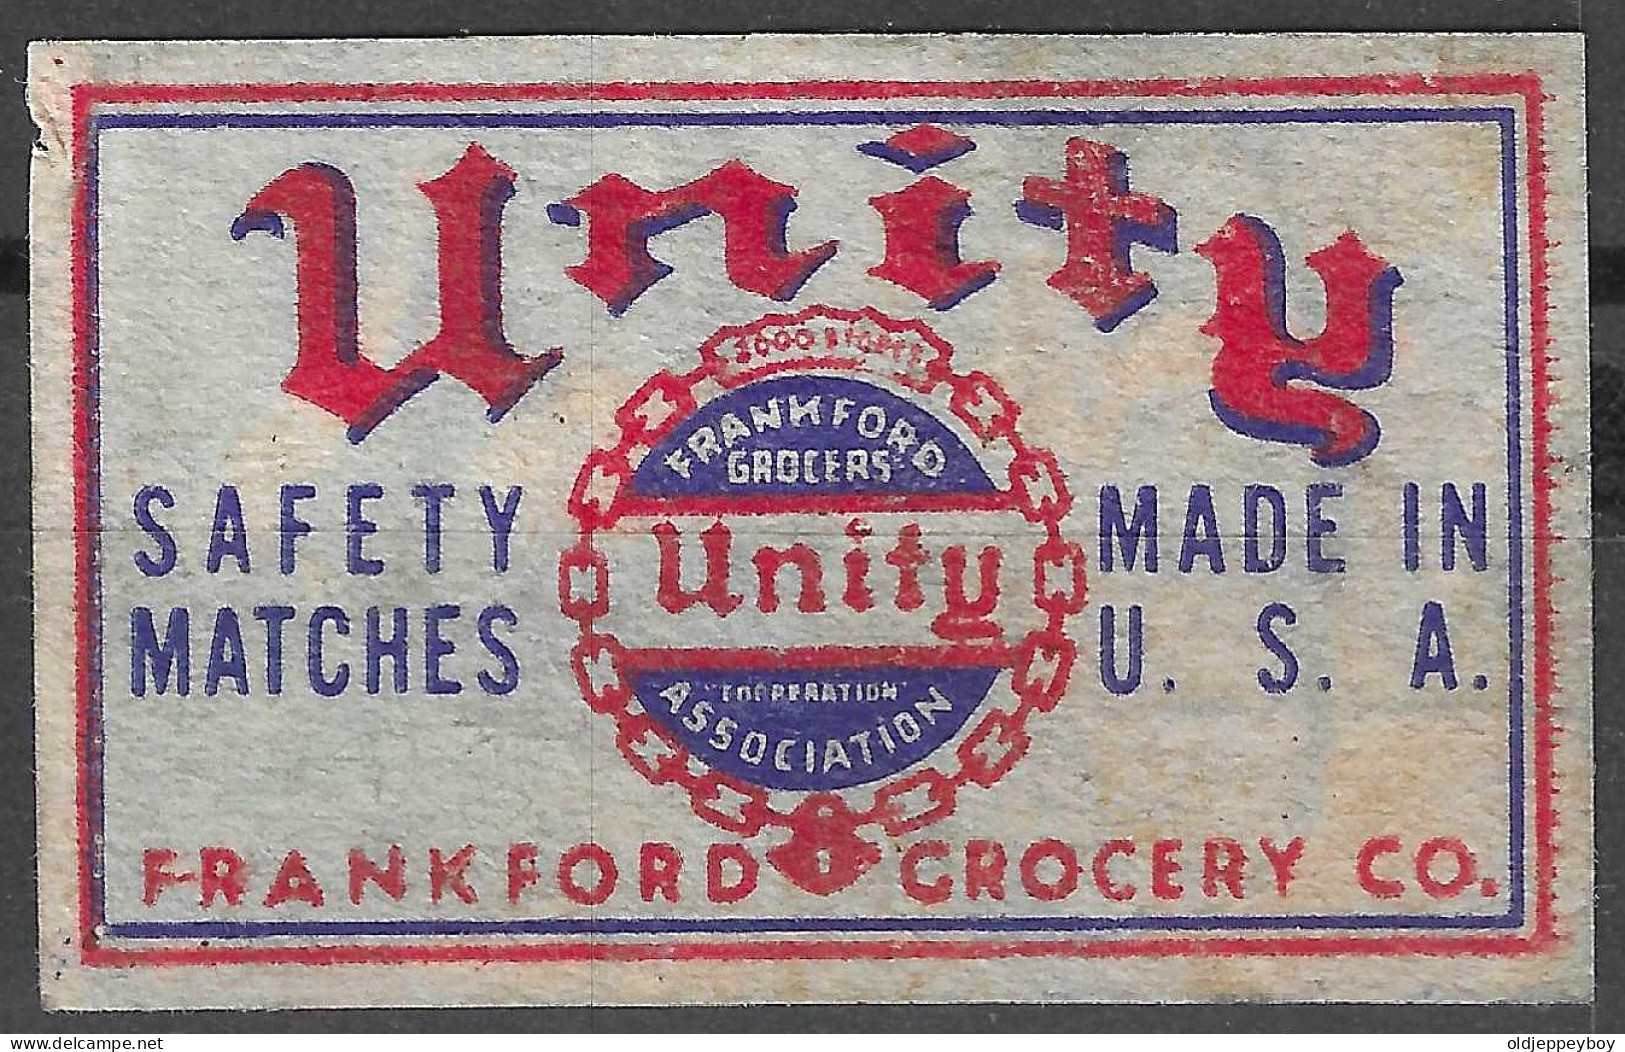  MADE IN U.S.A  Phillumeny MATCHBOX LABEL UNITY FRANKFORD GROCERY CO.3.5 X 5 CM - Boites D'allumettes - Etiquettes